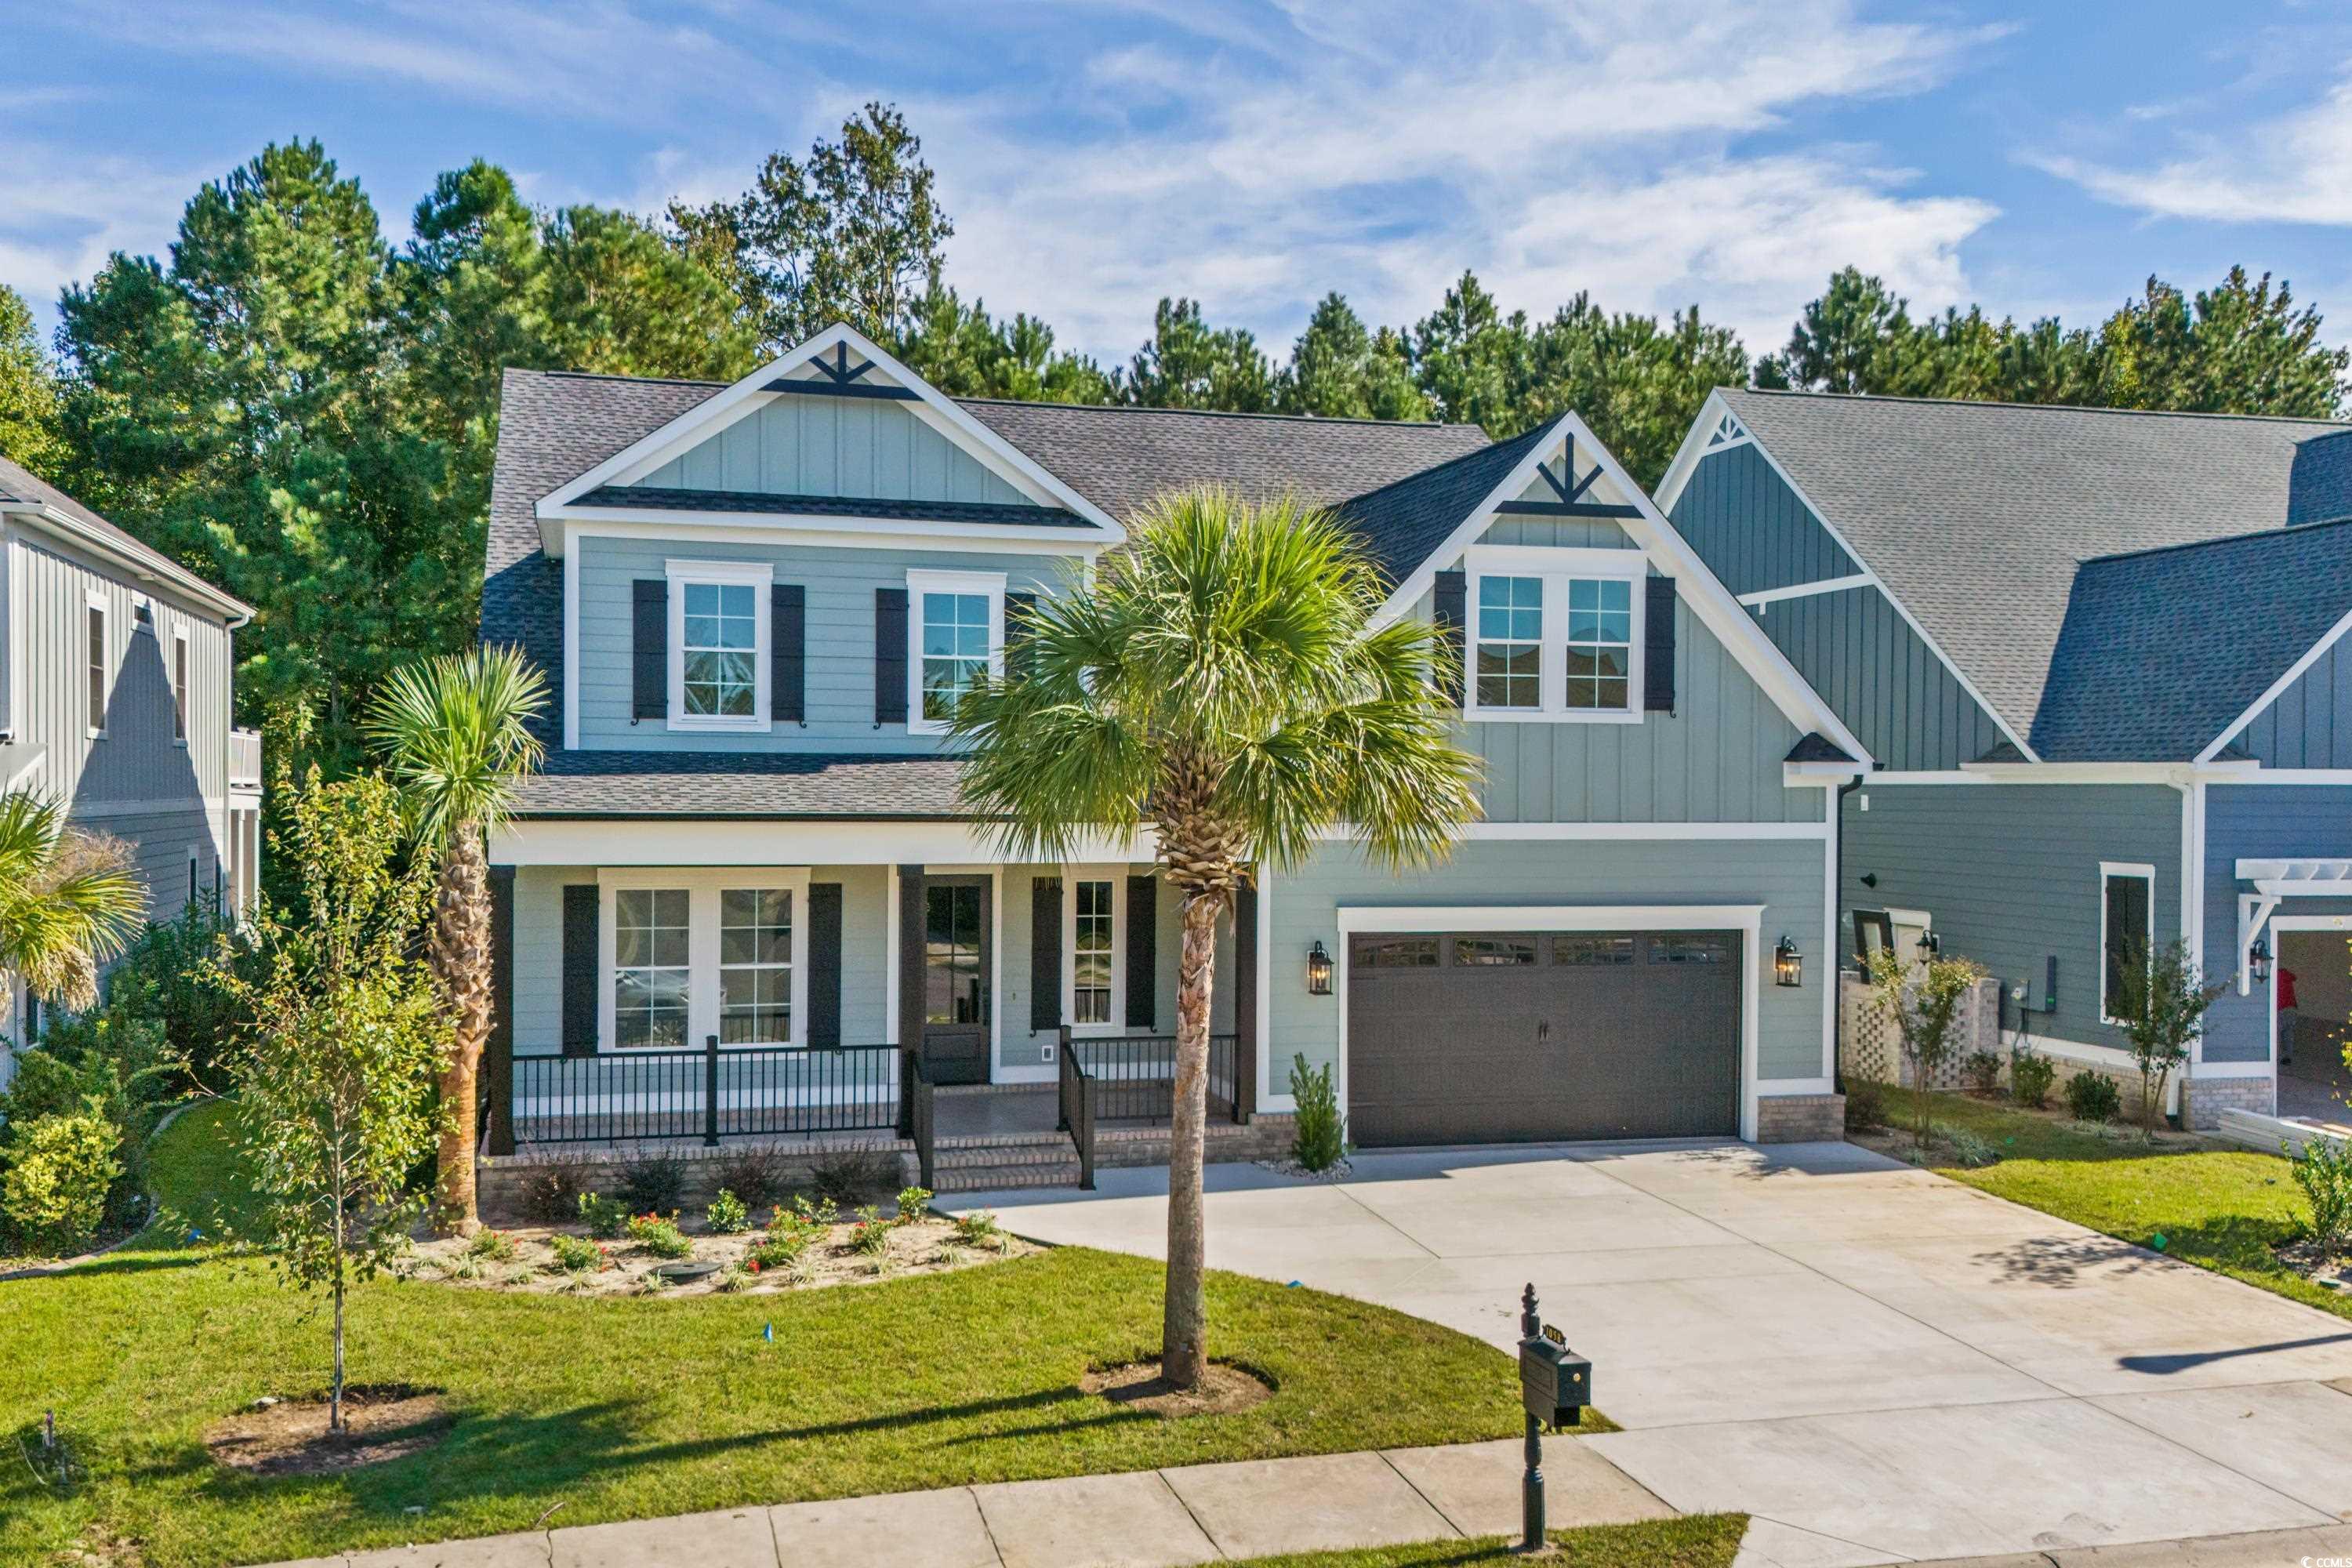 1058 East Isle of Palms Ave. Myrtle Beach, SC 29579